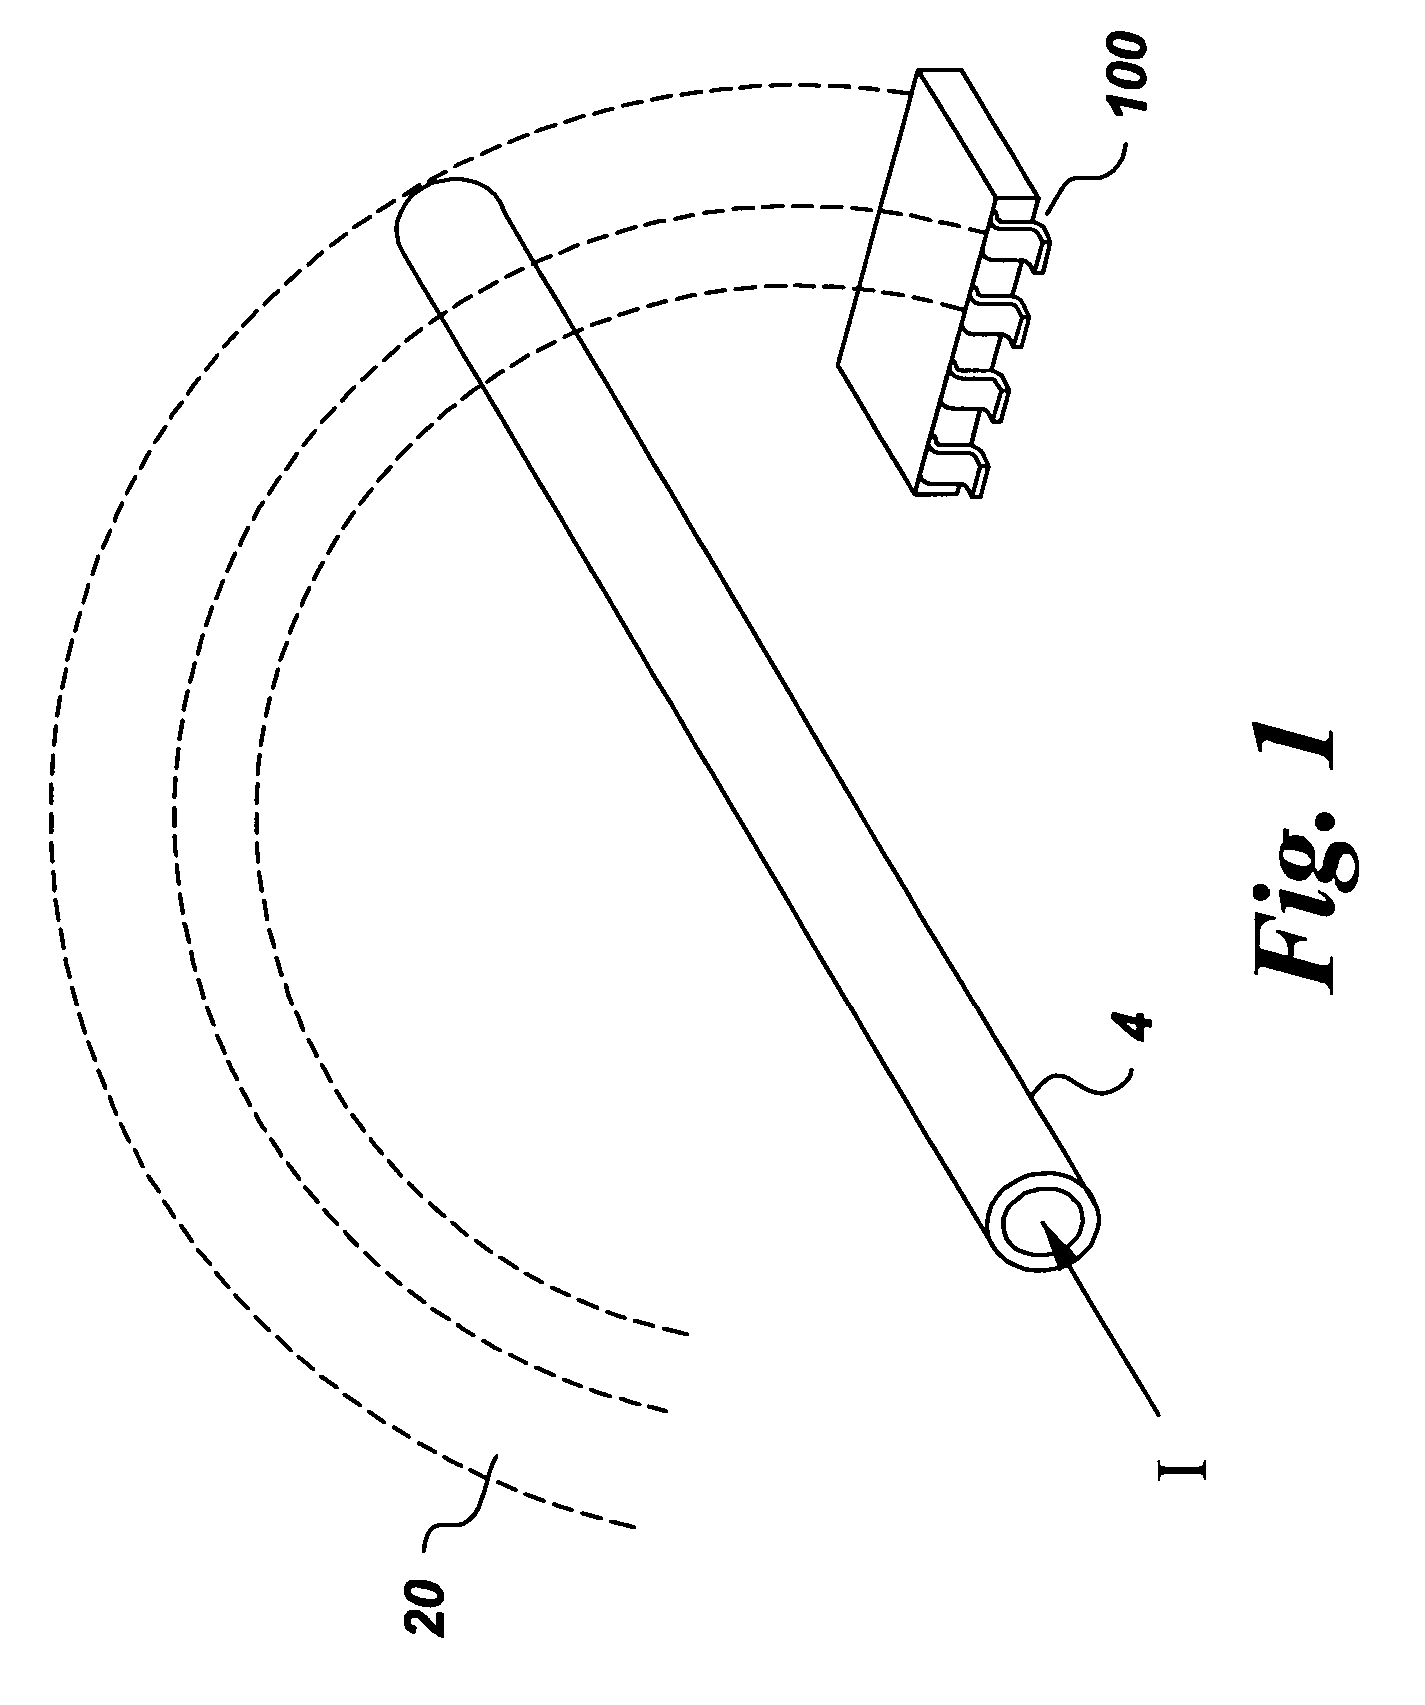 Micro-electromechanical system (MEMS) based current and magnetic field sensor having capacitive sense components